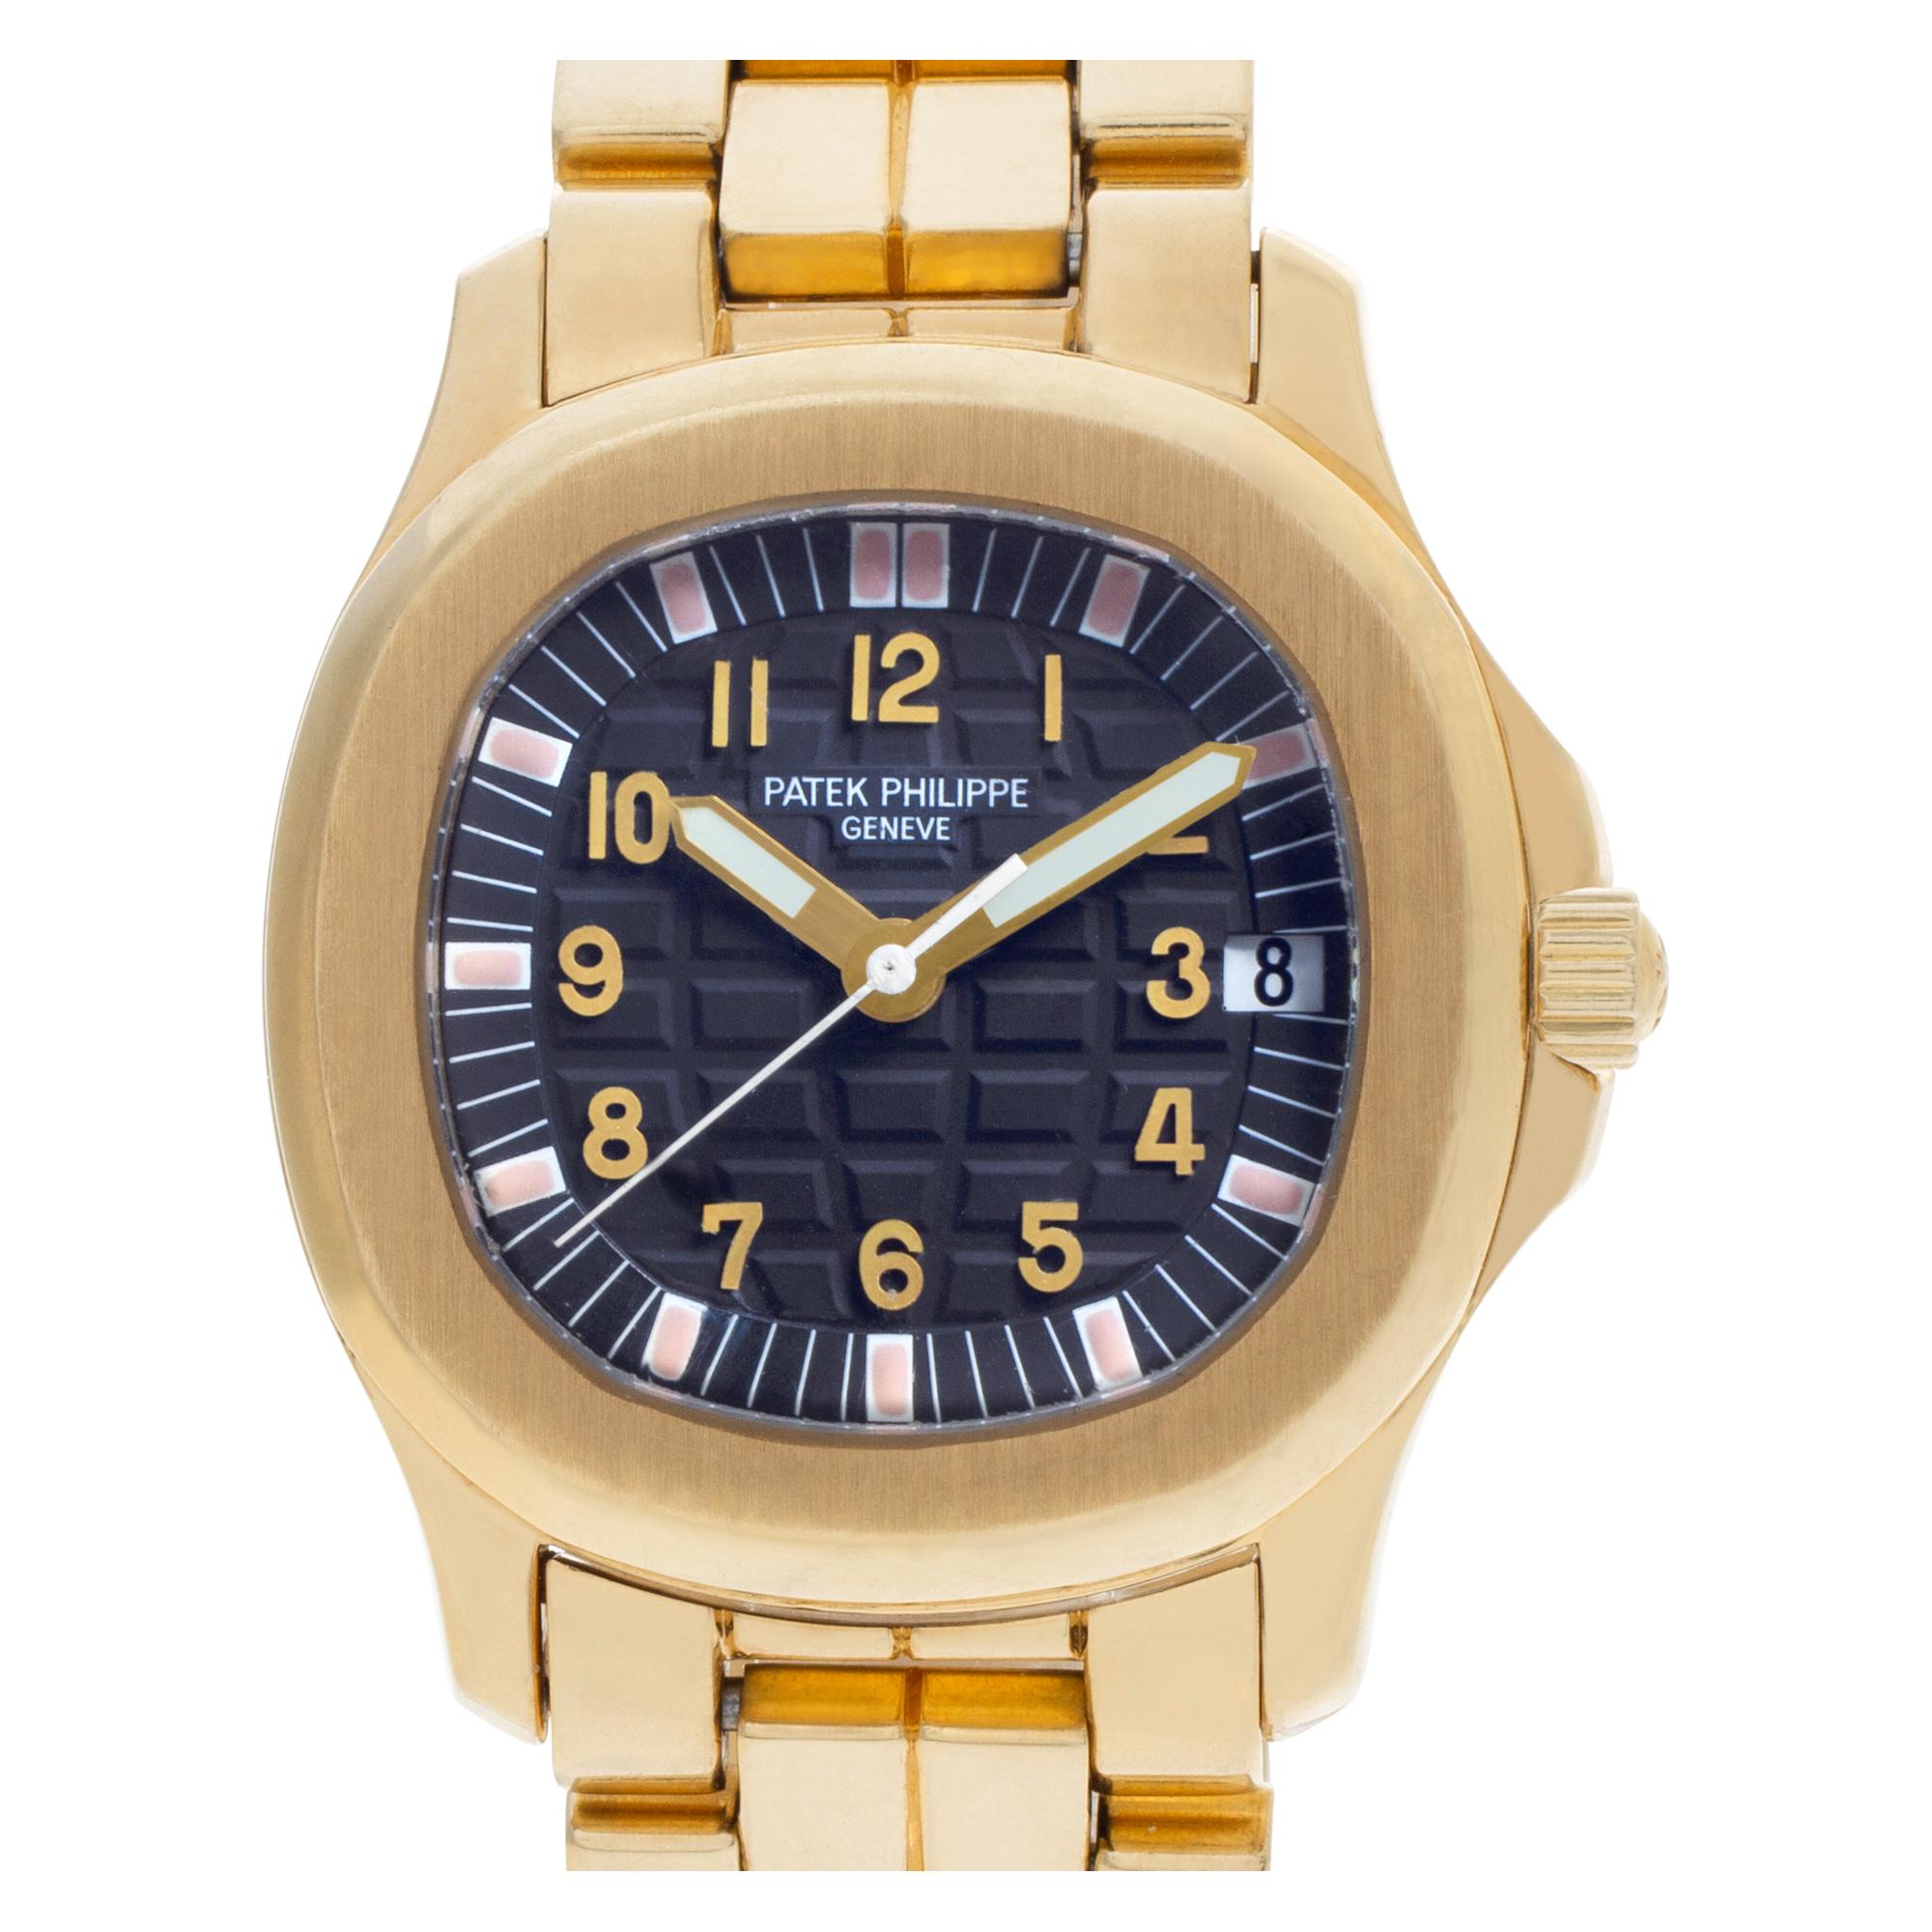 Patek Philippe Aquanaut in 18k Yellow Gold Ref. 5066/1J In Excellent Condition For Sale In Surfside, FL